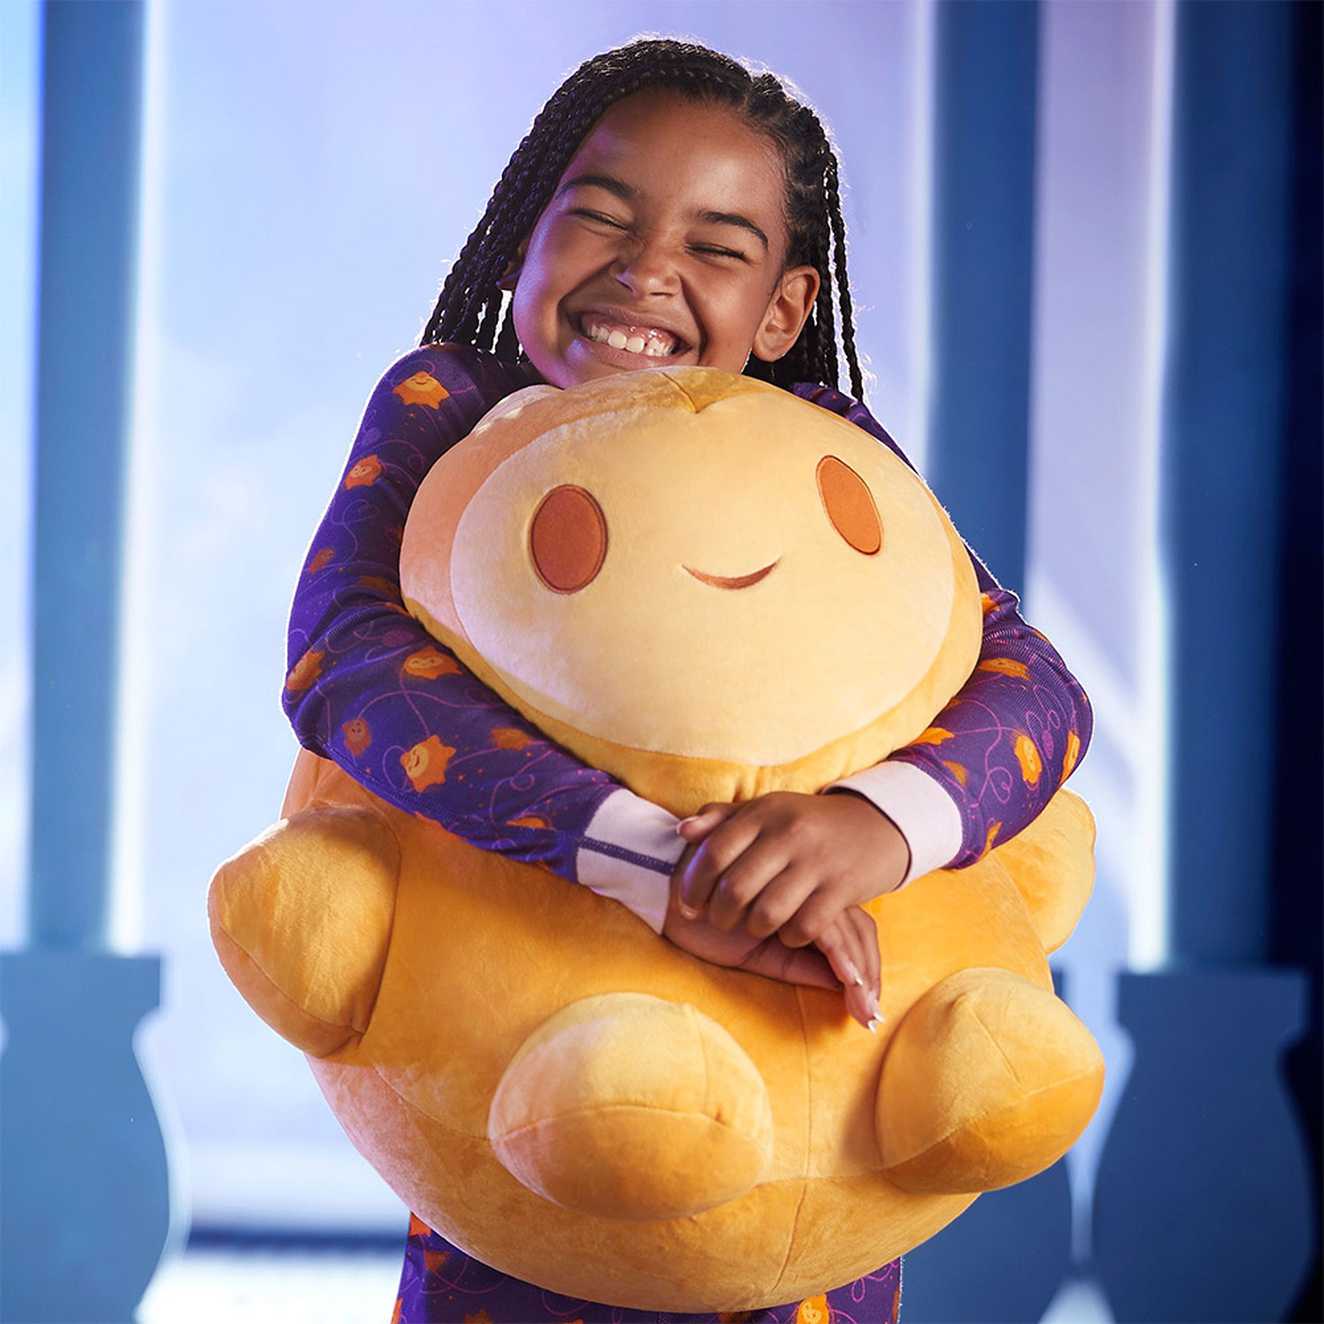 A smiling child cuddling a large yellow Disney plush toy from the Shop Disney Wish Collection.